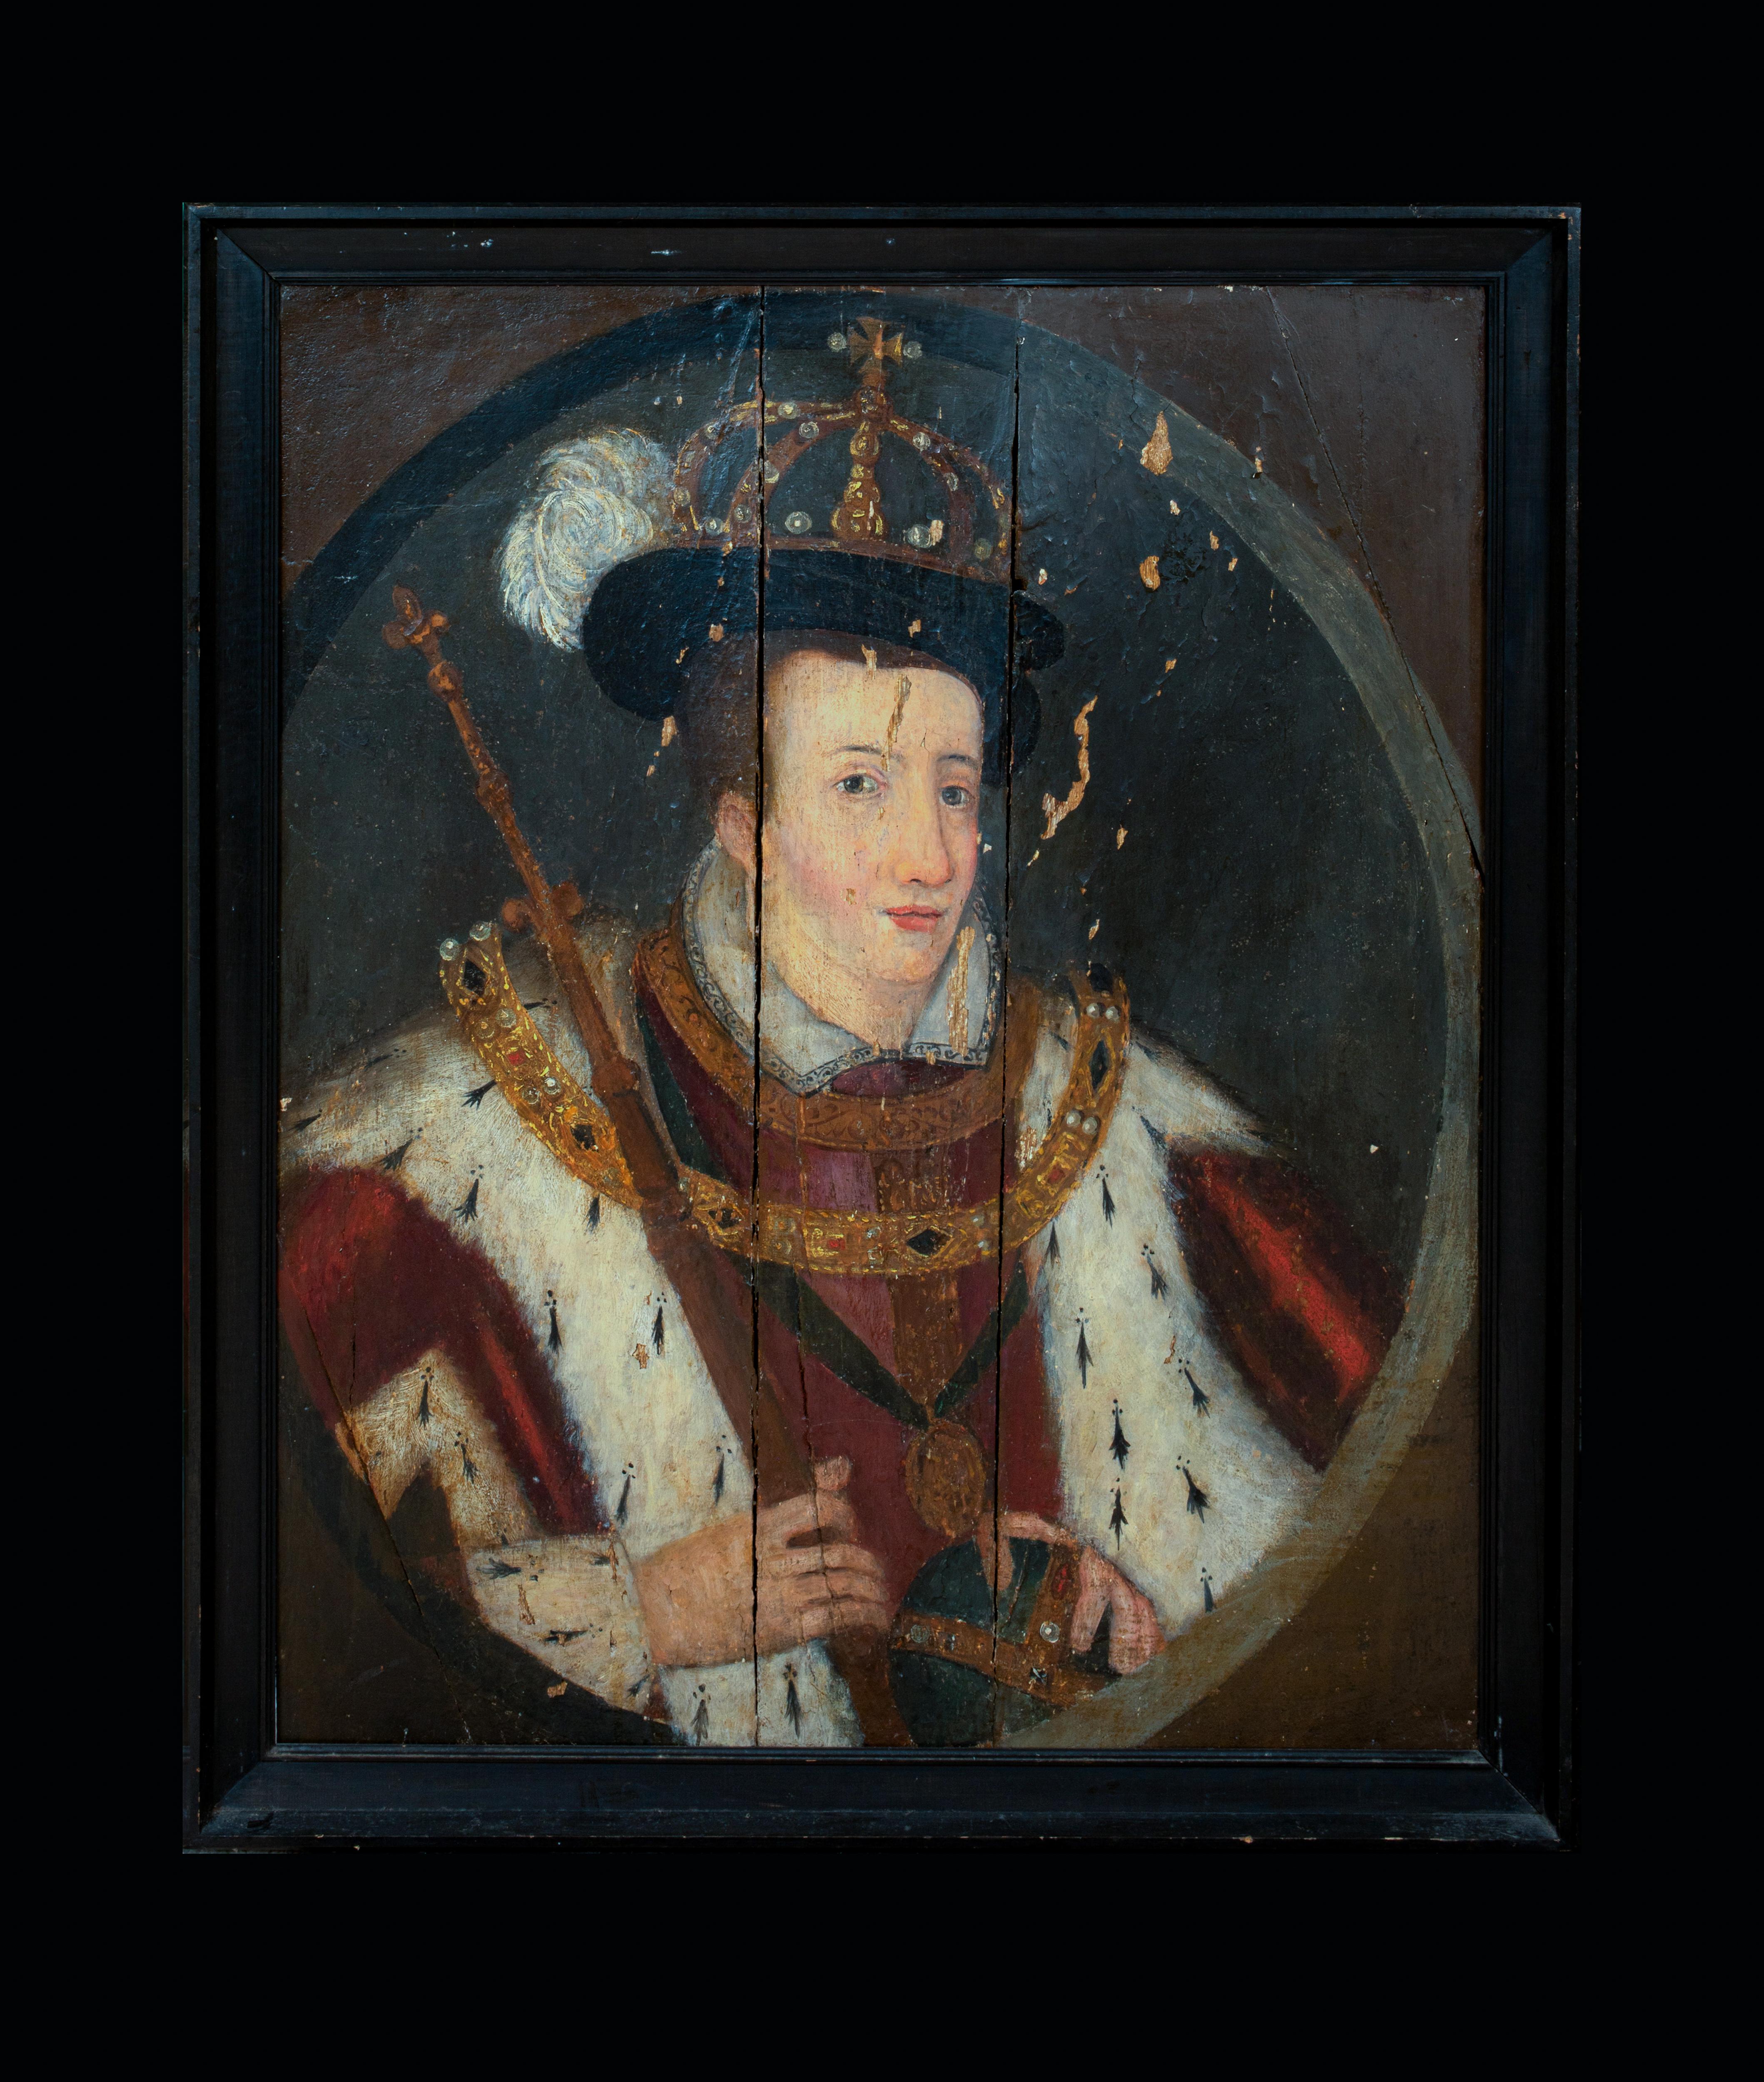 Coronation Portrait Of King Edward VI (1537-1553) as King Of England & Ireland - Painting by Unknown